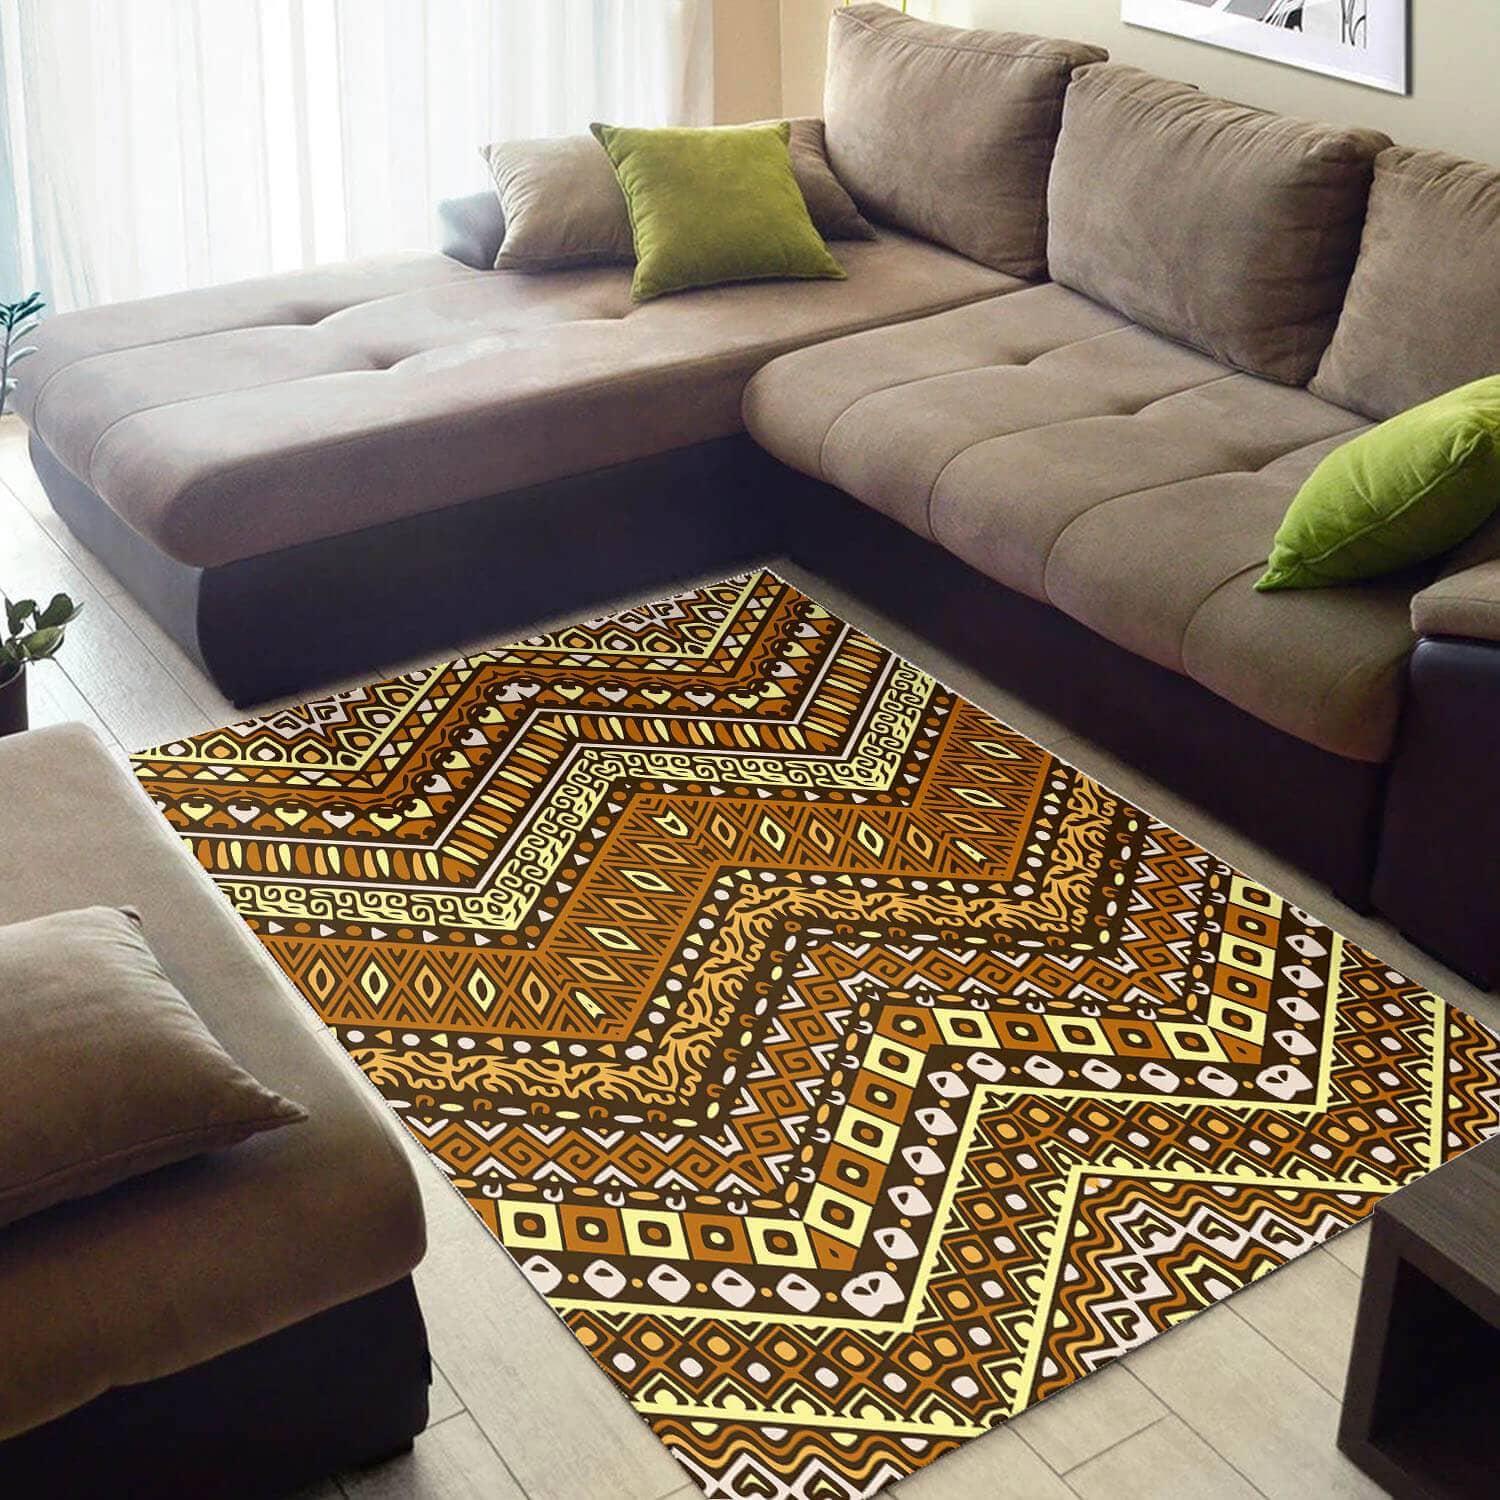 Trendy African Style Holiday Afro American Afrocentric Pattern Art Design Floor Inspired Living Room Rug